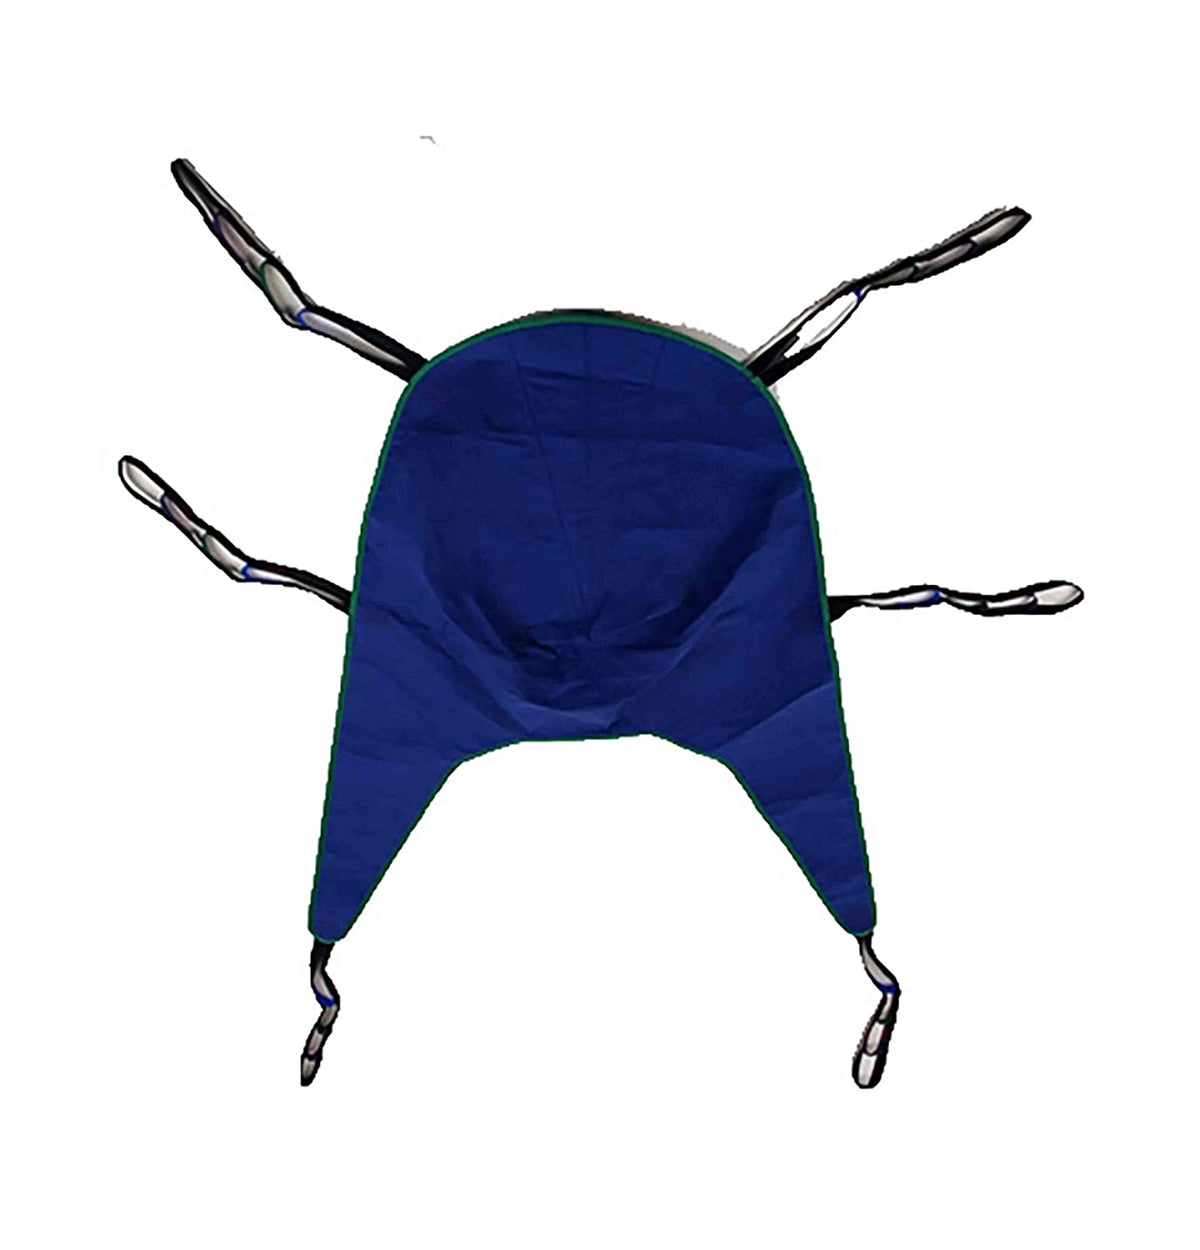 Divided Leg Sling with head support